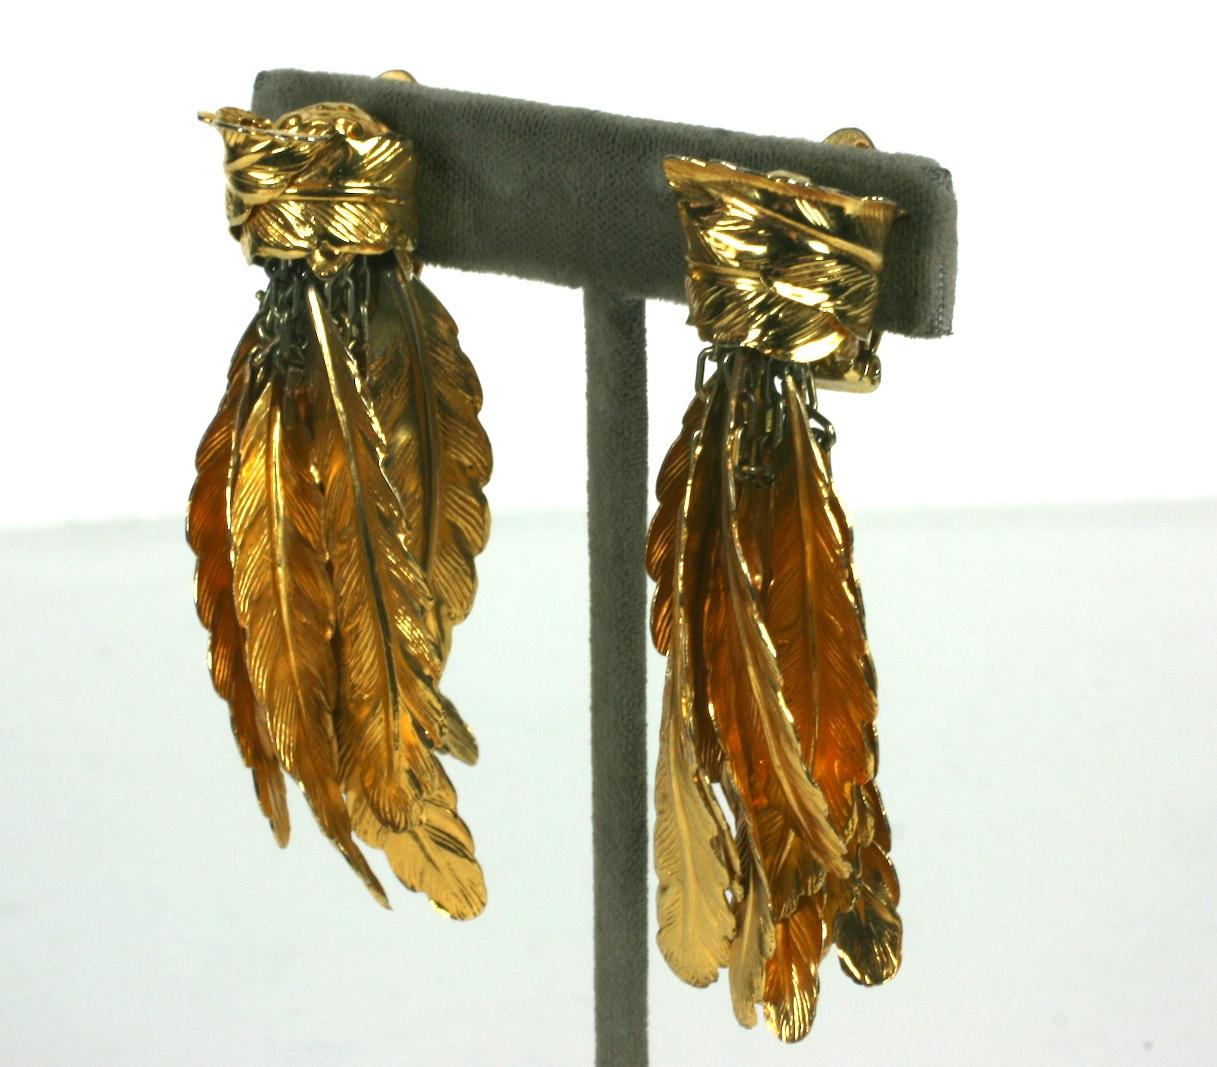 Unusual and  striking Italian Gilt Feather Earrings from the 1980's. A gilt feather is wrapped around a gold 